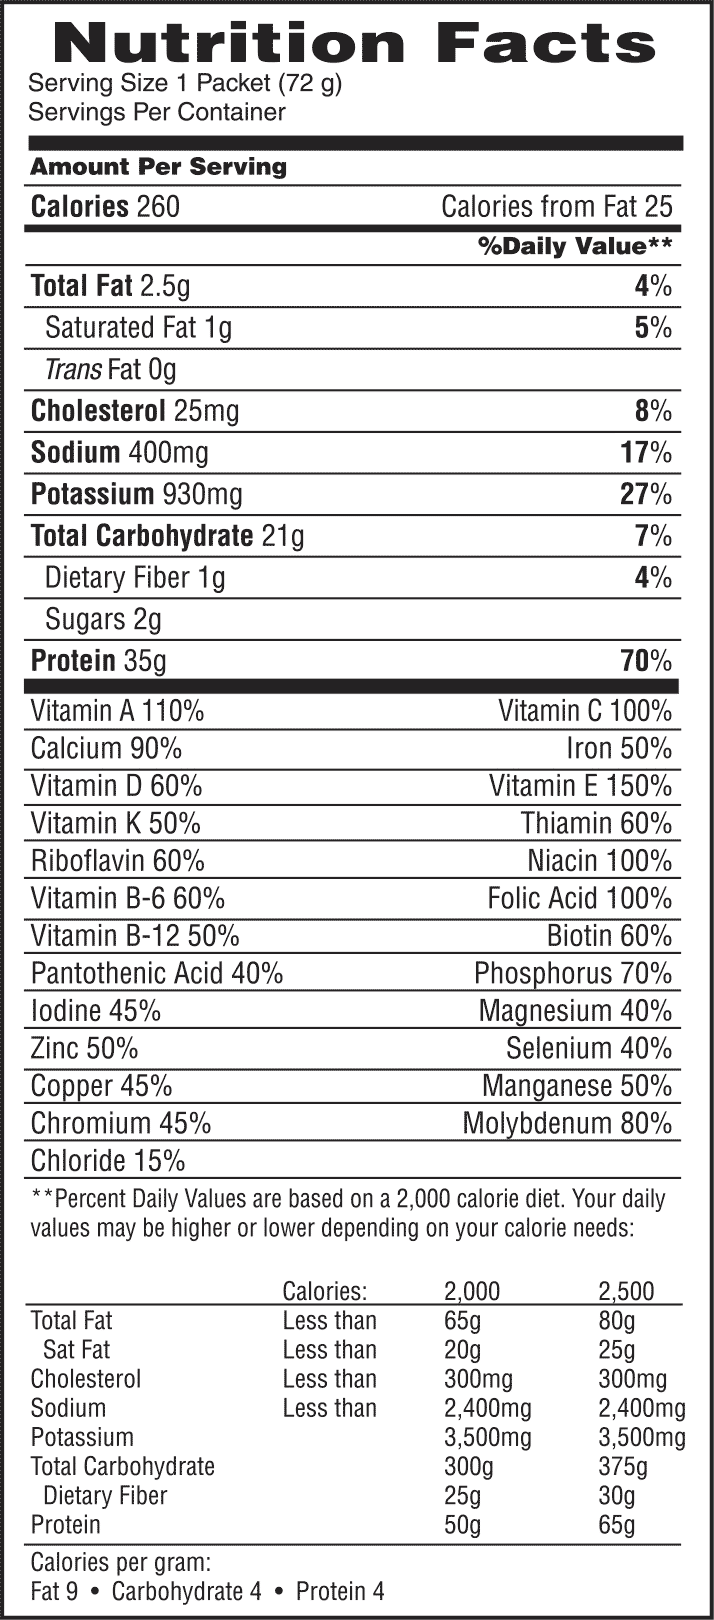 Nutrition Facts for a 72g packet: 260 Calories, 2.5g Total Fat, 21g Carbs, 35g Protein, and a range of vitamins and minerals. Based on a 2,000 calorie diet.